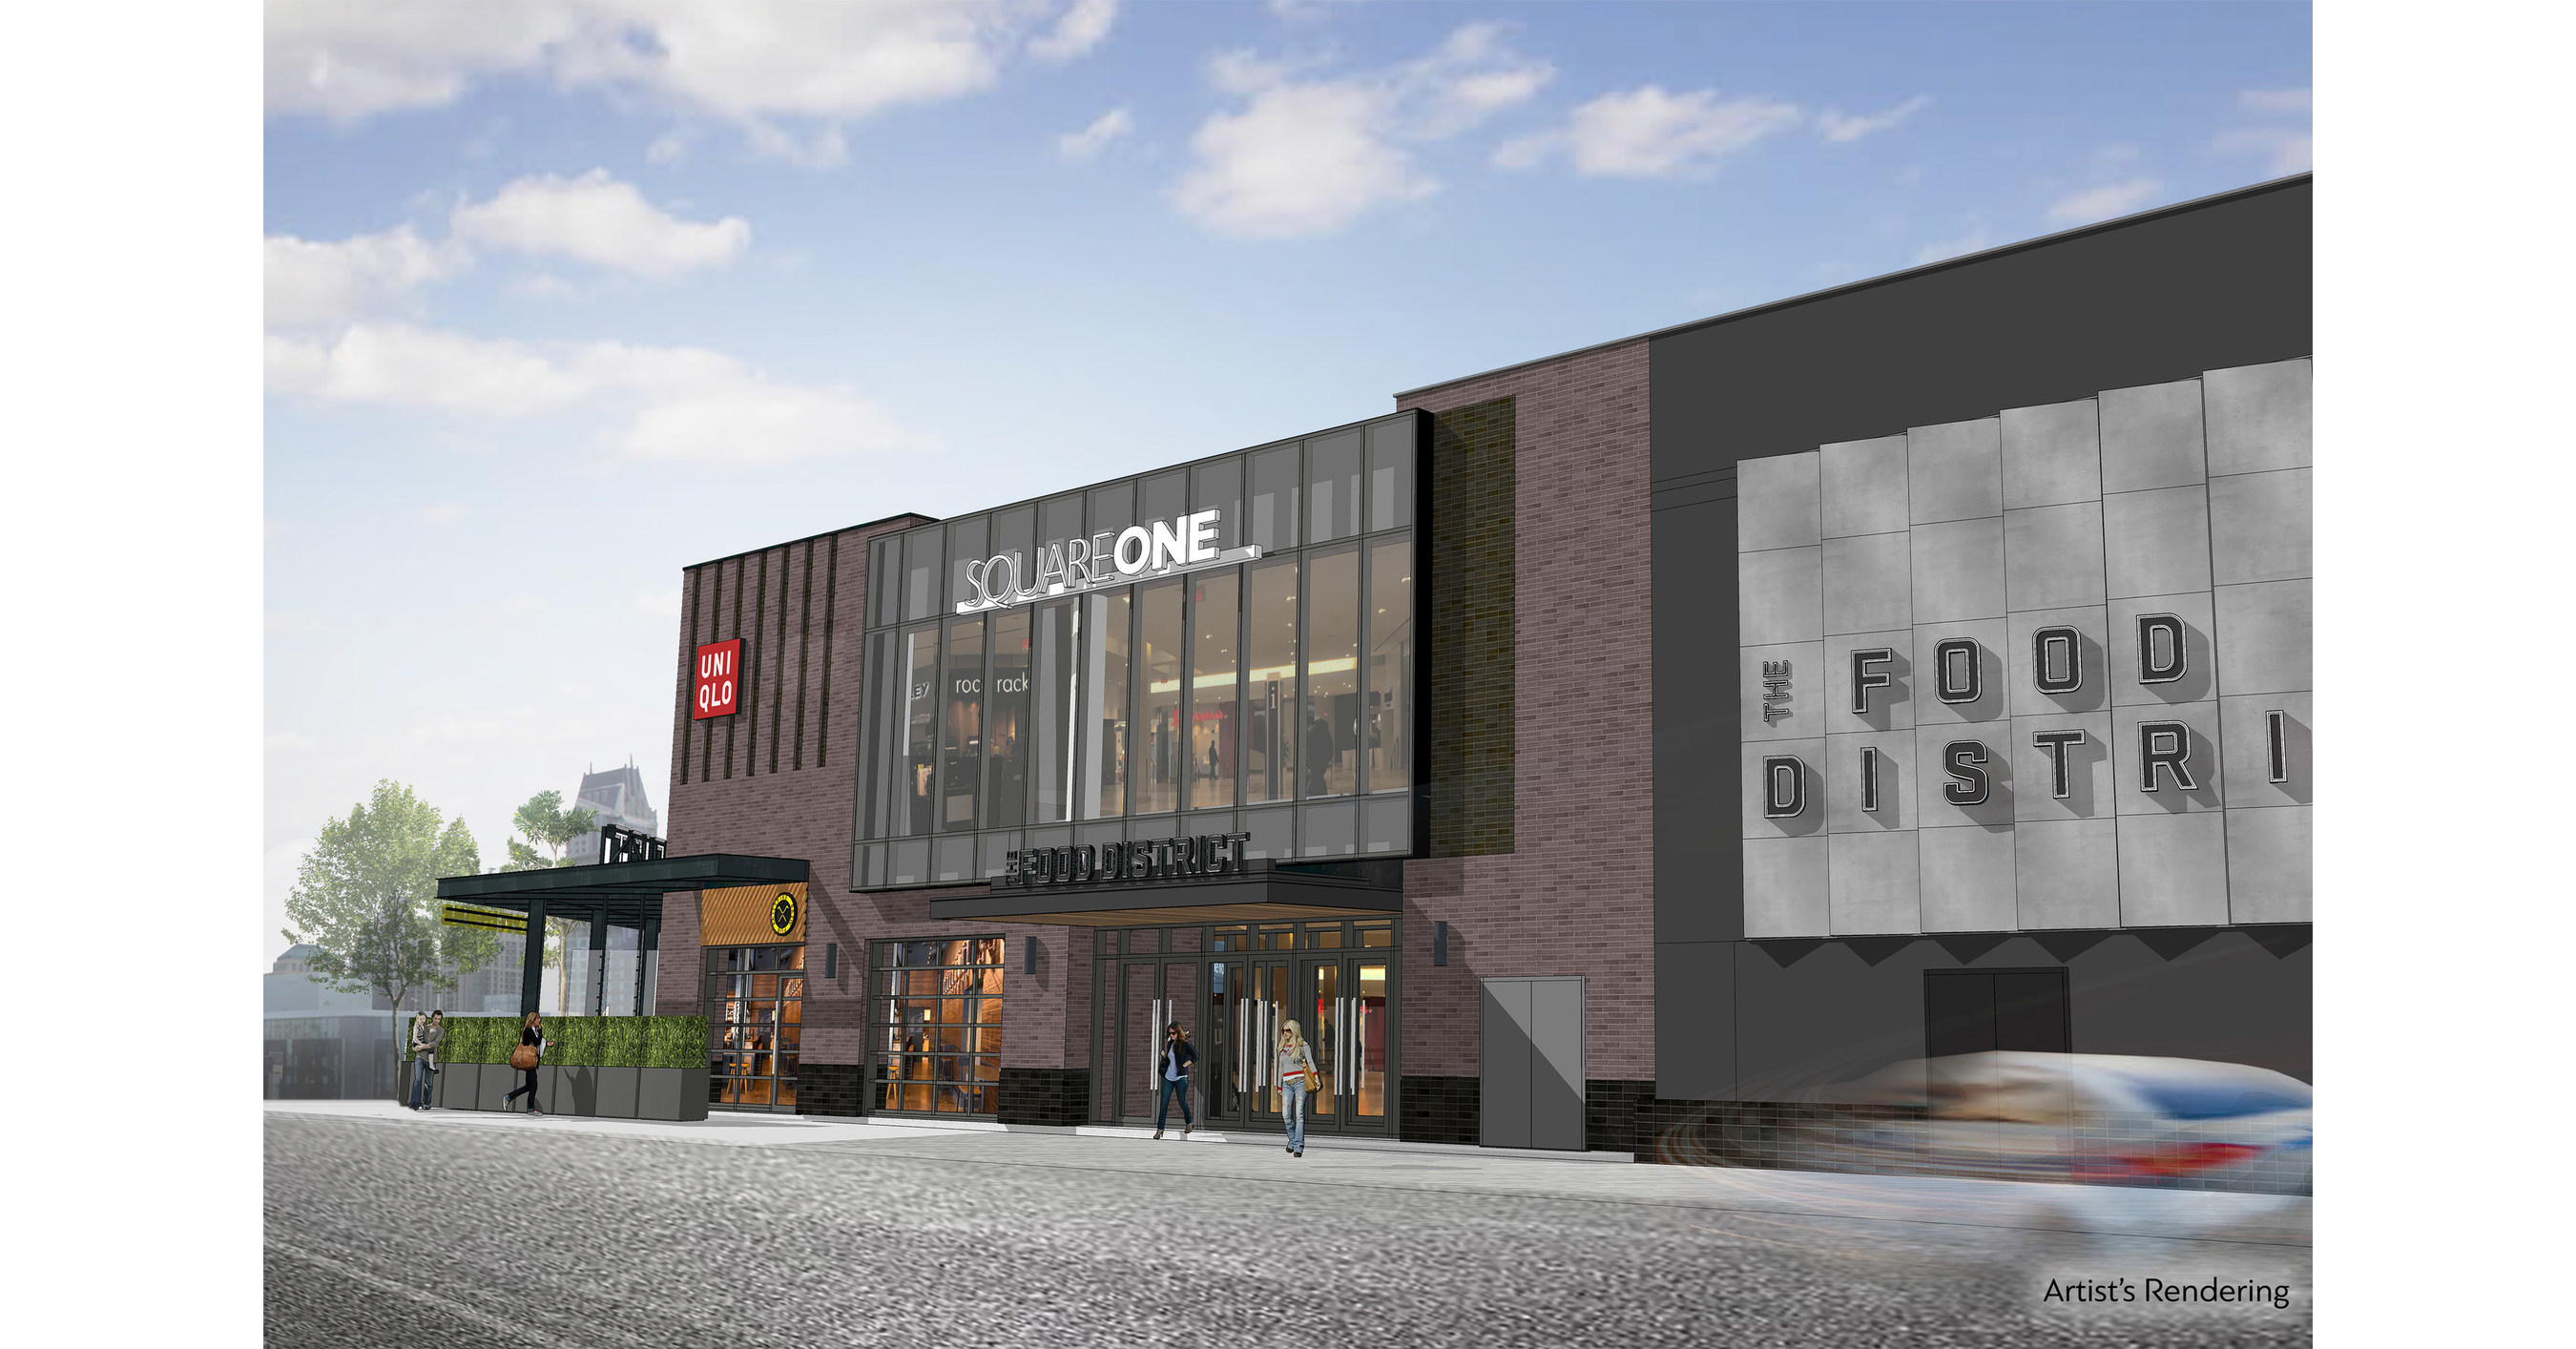 https://mma.prnewswire.com/media/705513/Square_One_Shopping_Centre_Square_One_Announces_West_Expansion_P.jpg?p=facebook